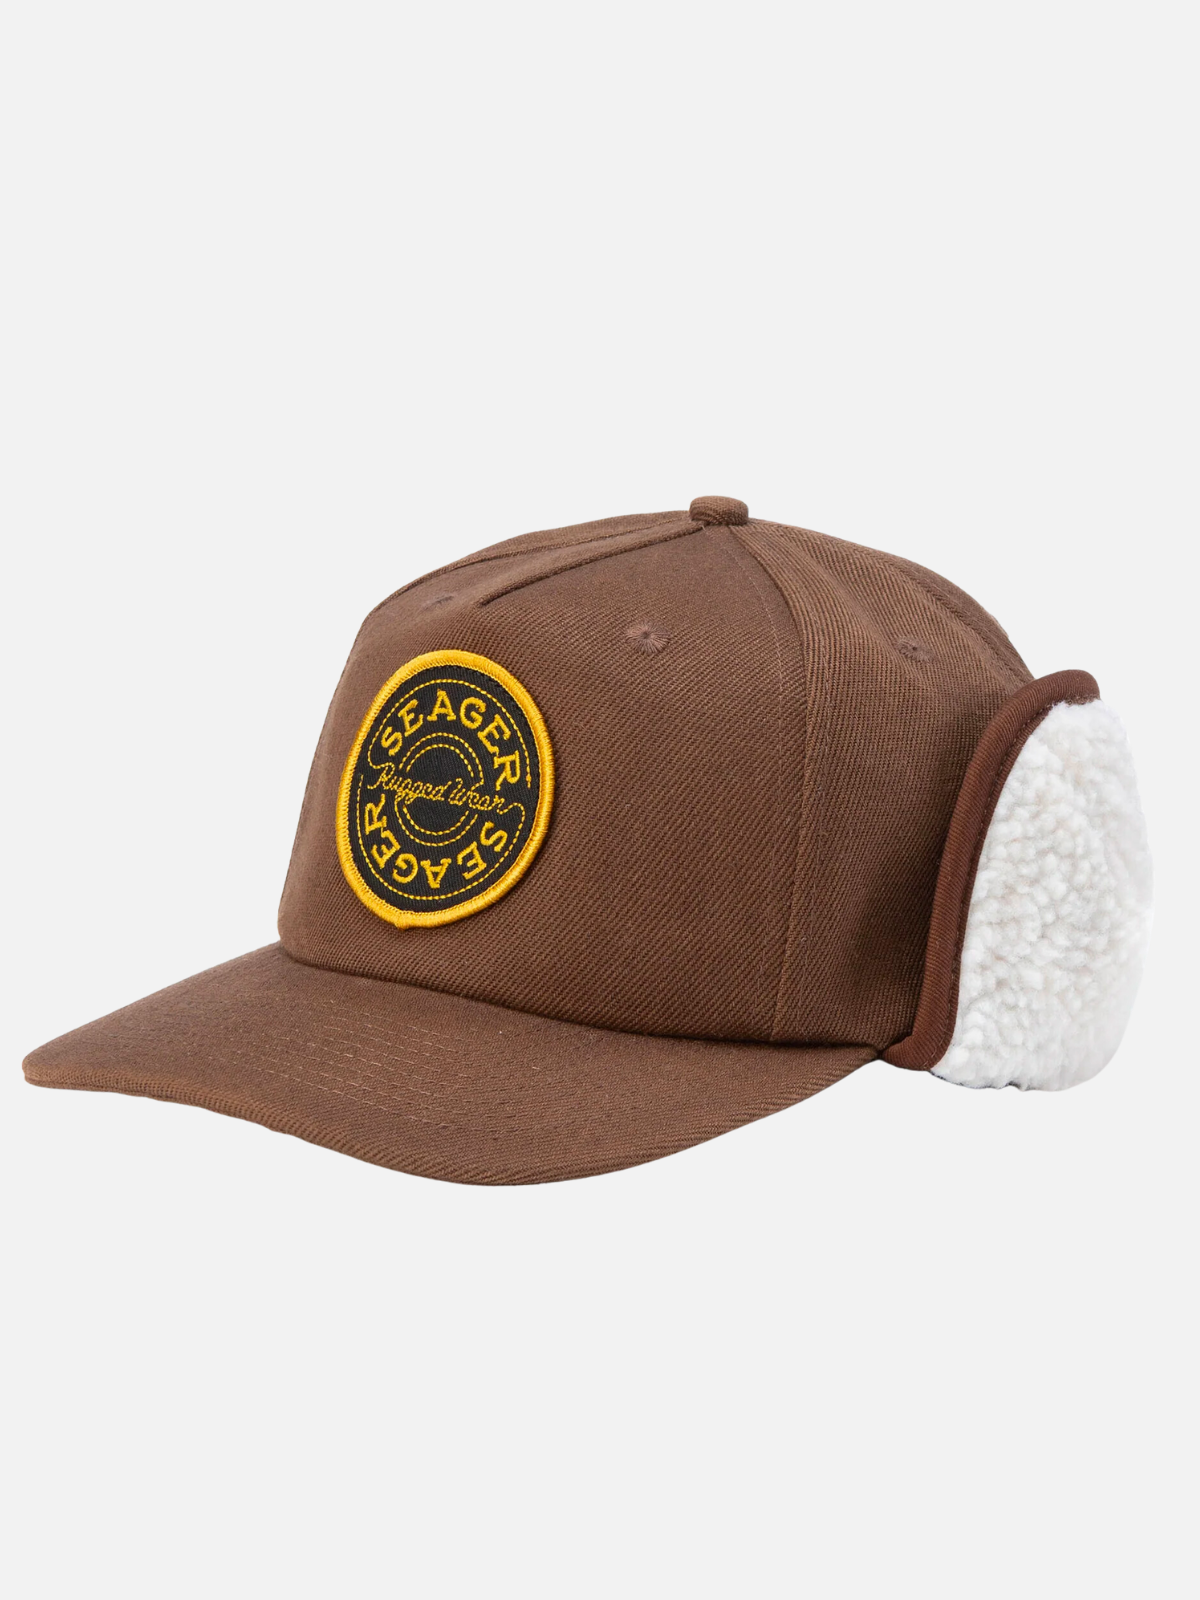 seager caliber cotton flapjack winter sherpa hat cotton canvas brown white gold yellow black brand patch kempt athens ga georgia men's clothing store